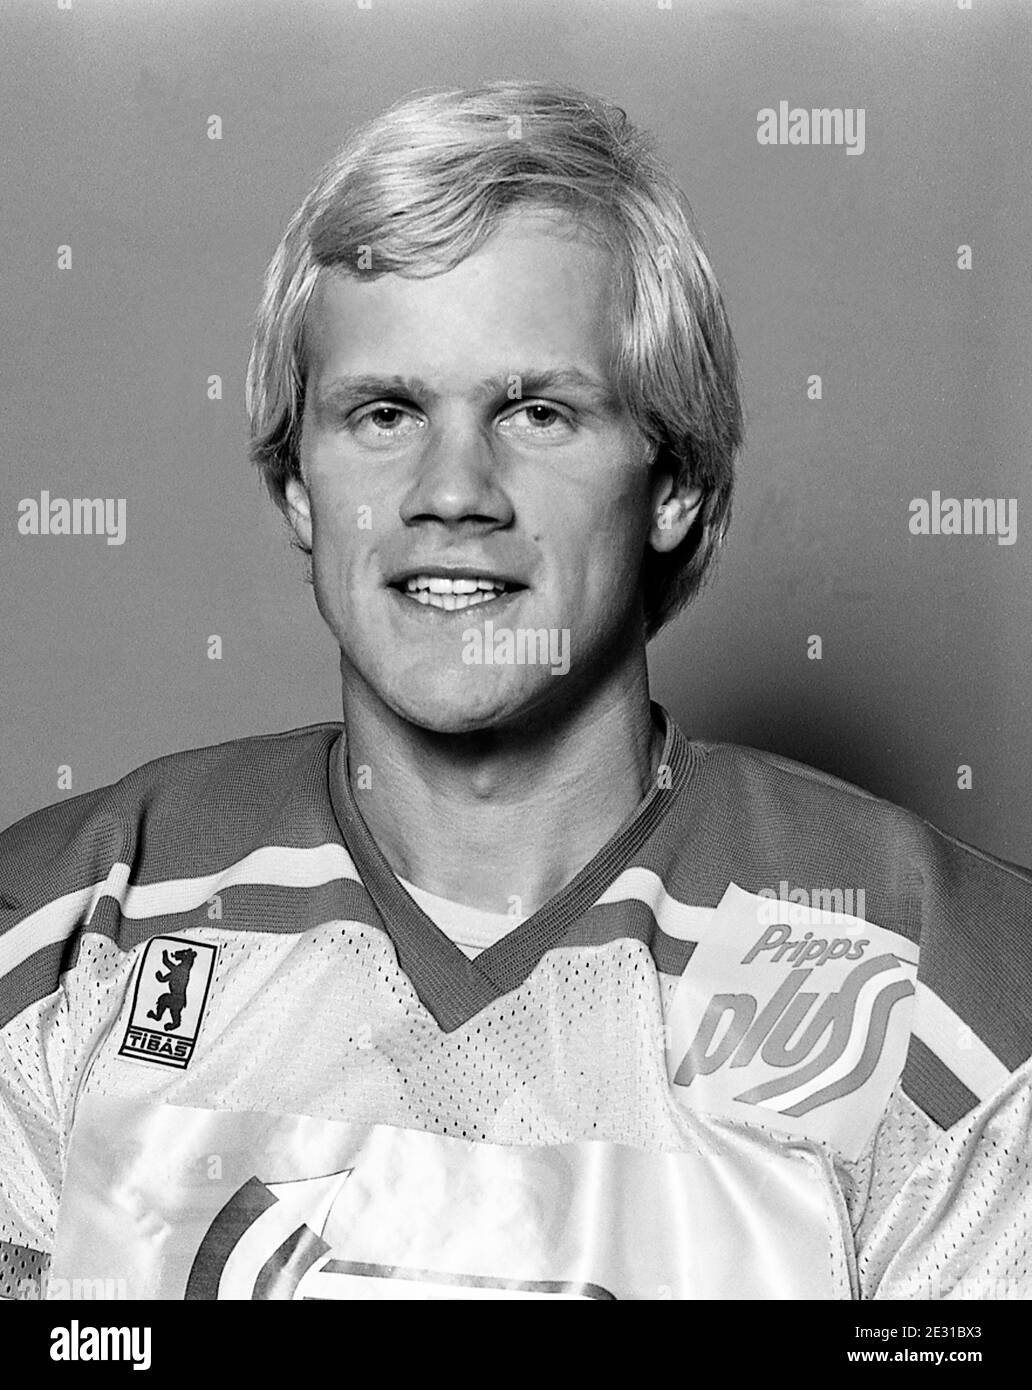 THOMAS GRADIN Swedish professional Ice hockey player in National team to Canada cup 1981 Stock Photo